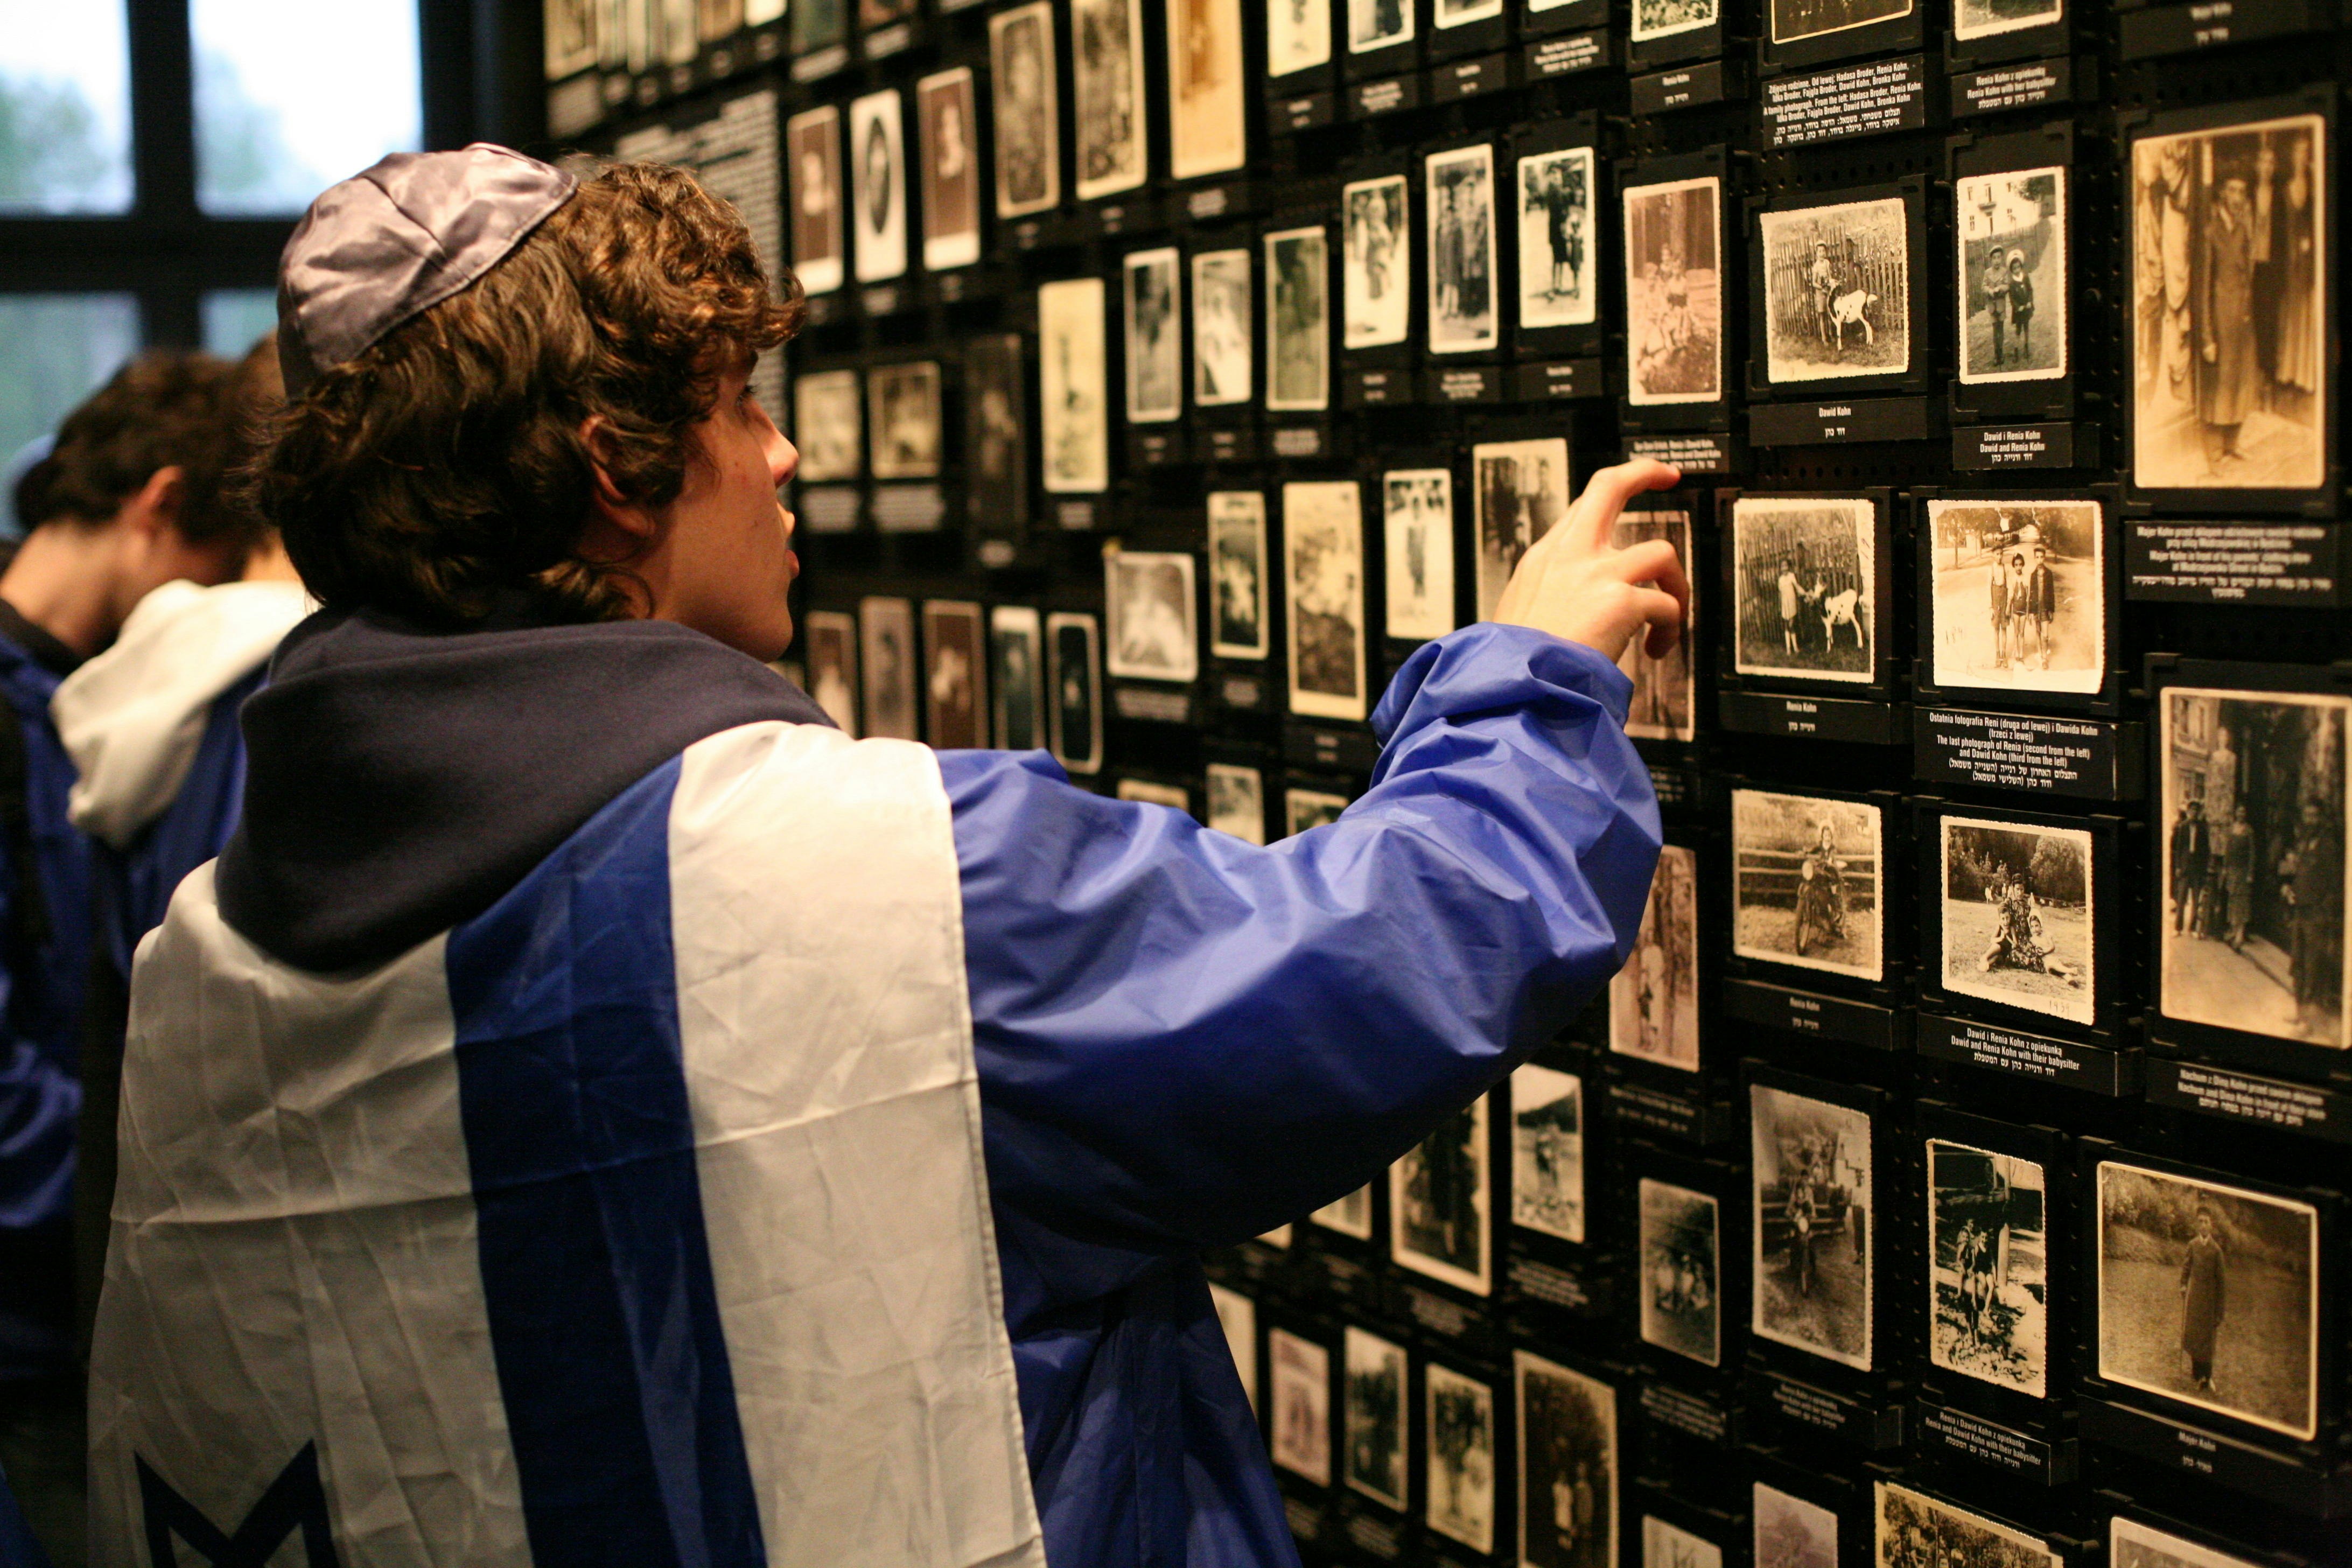 A young man wearing a yamaka hat looks at photos in the holocaust museum